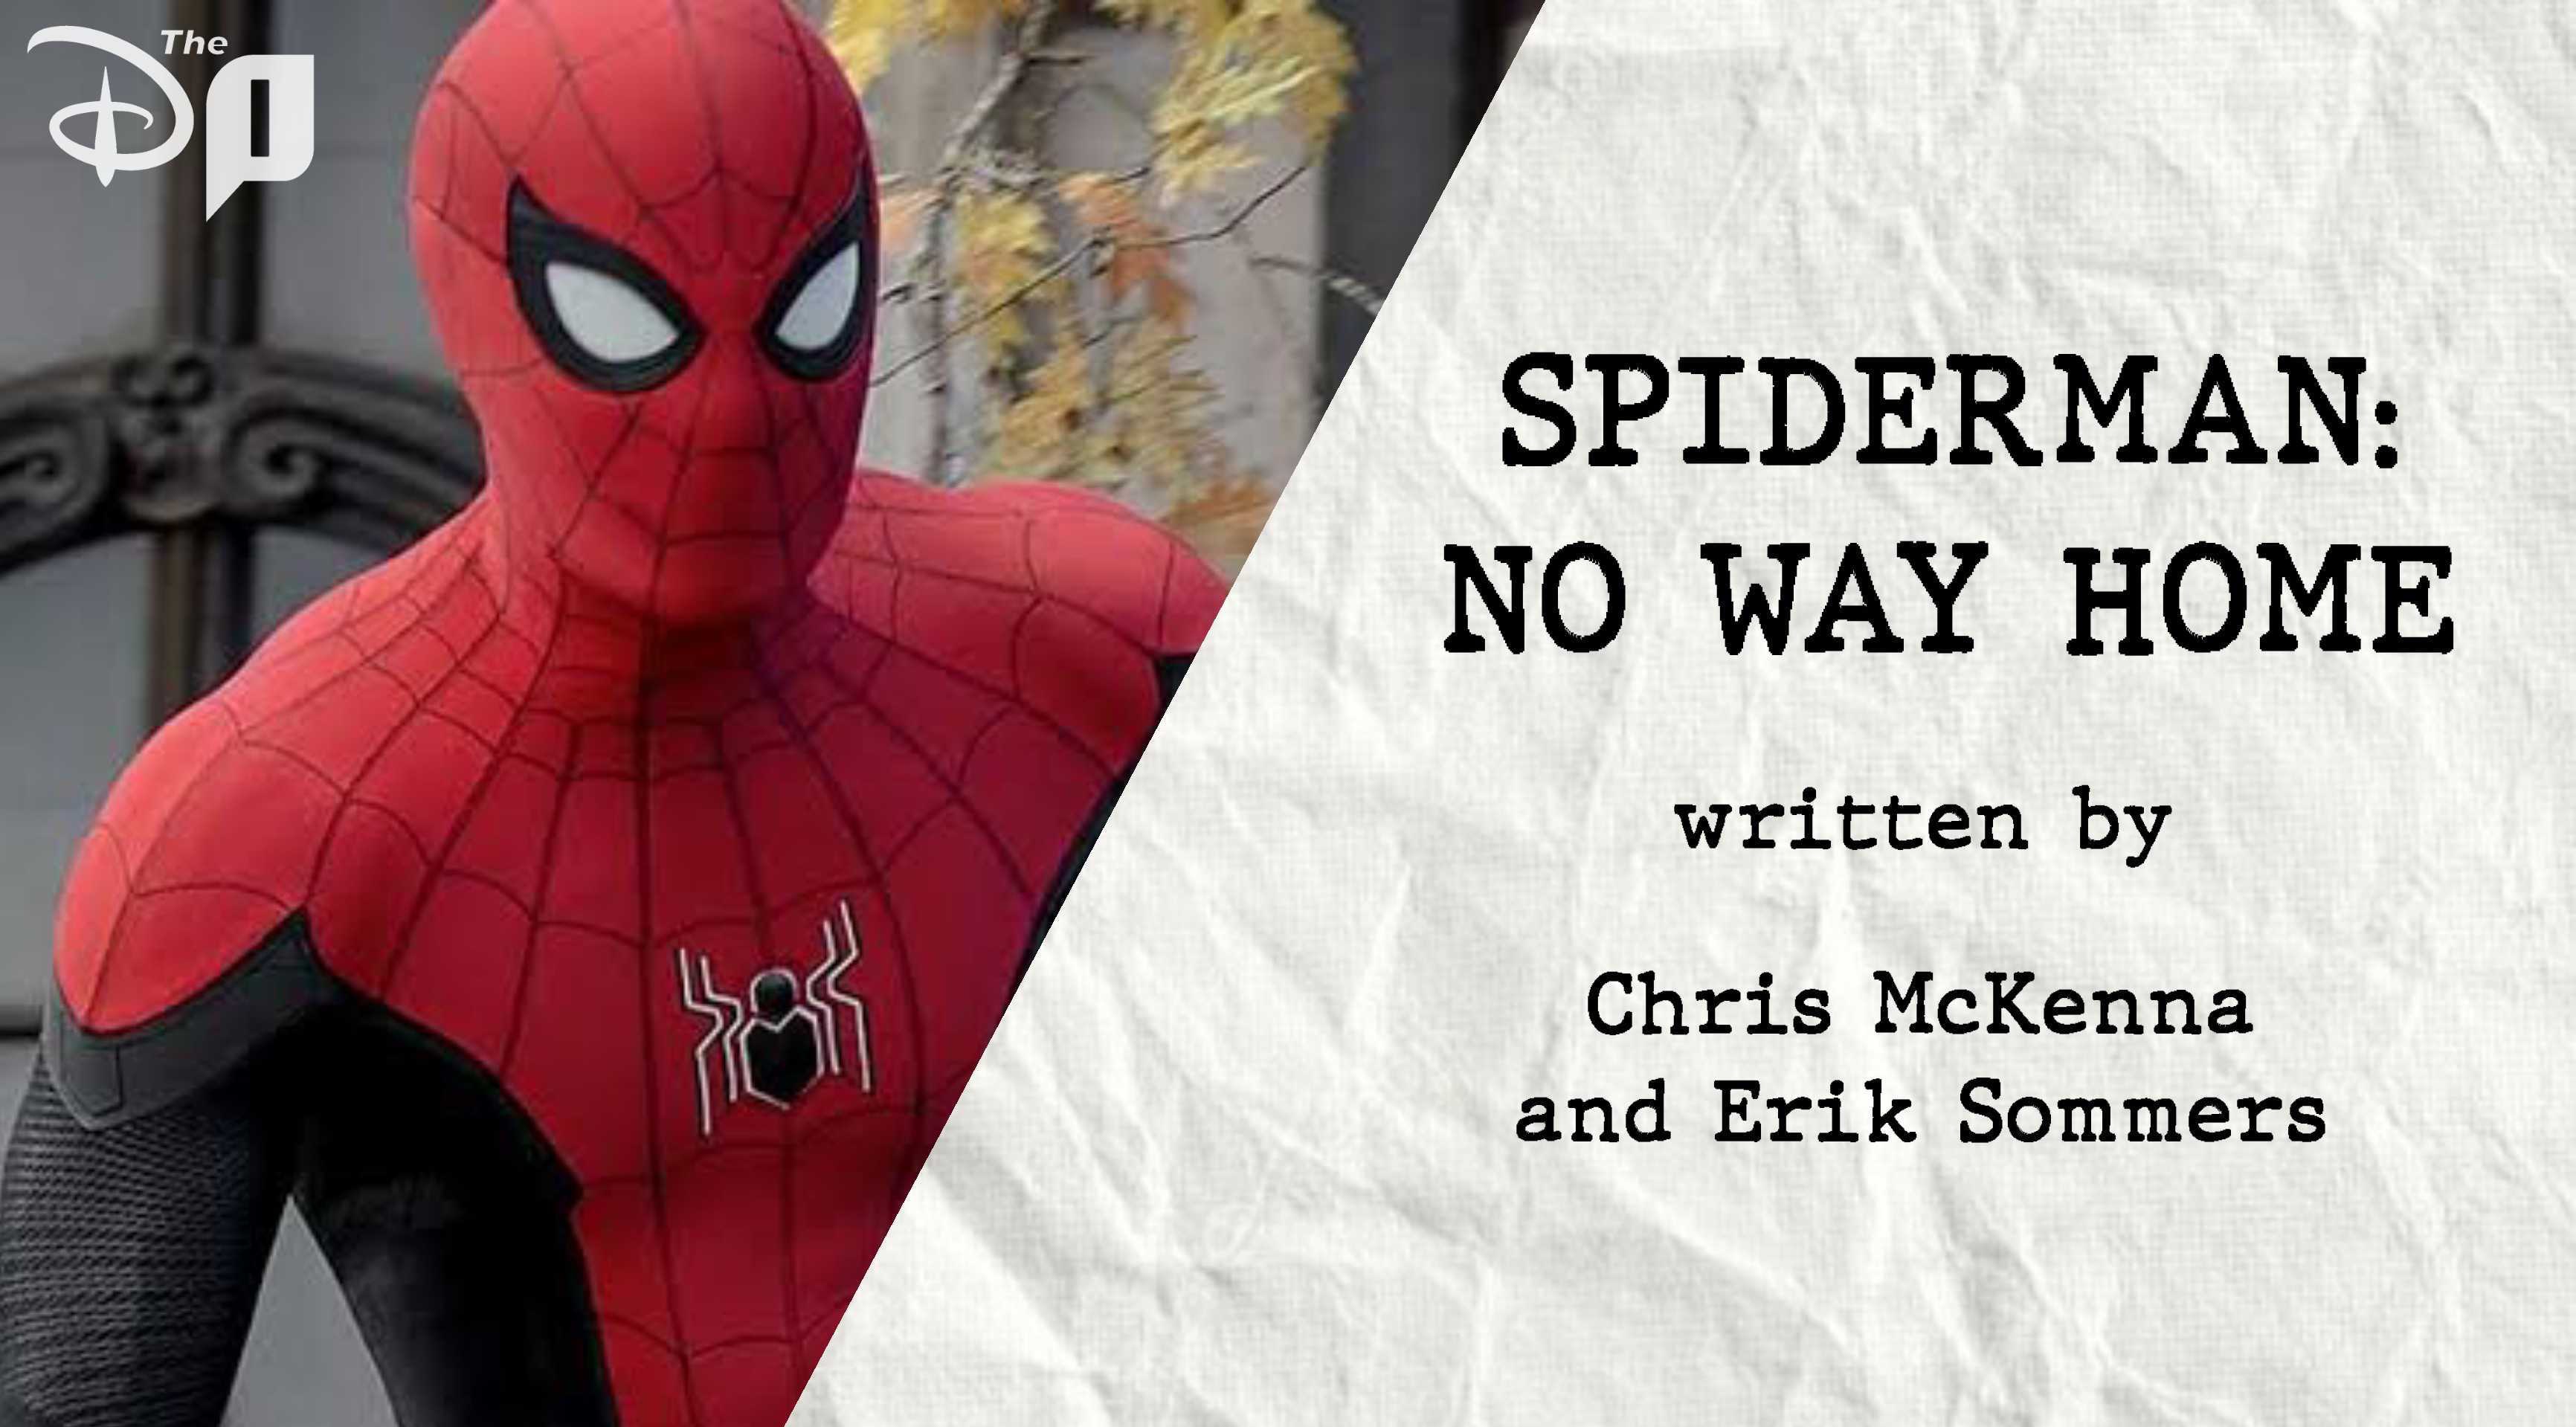 The ‘Spider-Man: No Way Home’ Screenplay Has Been Published Online